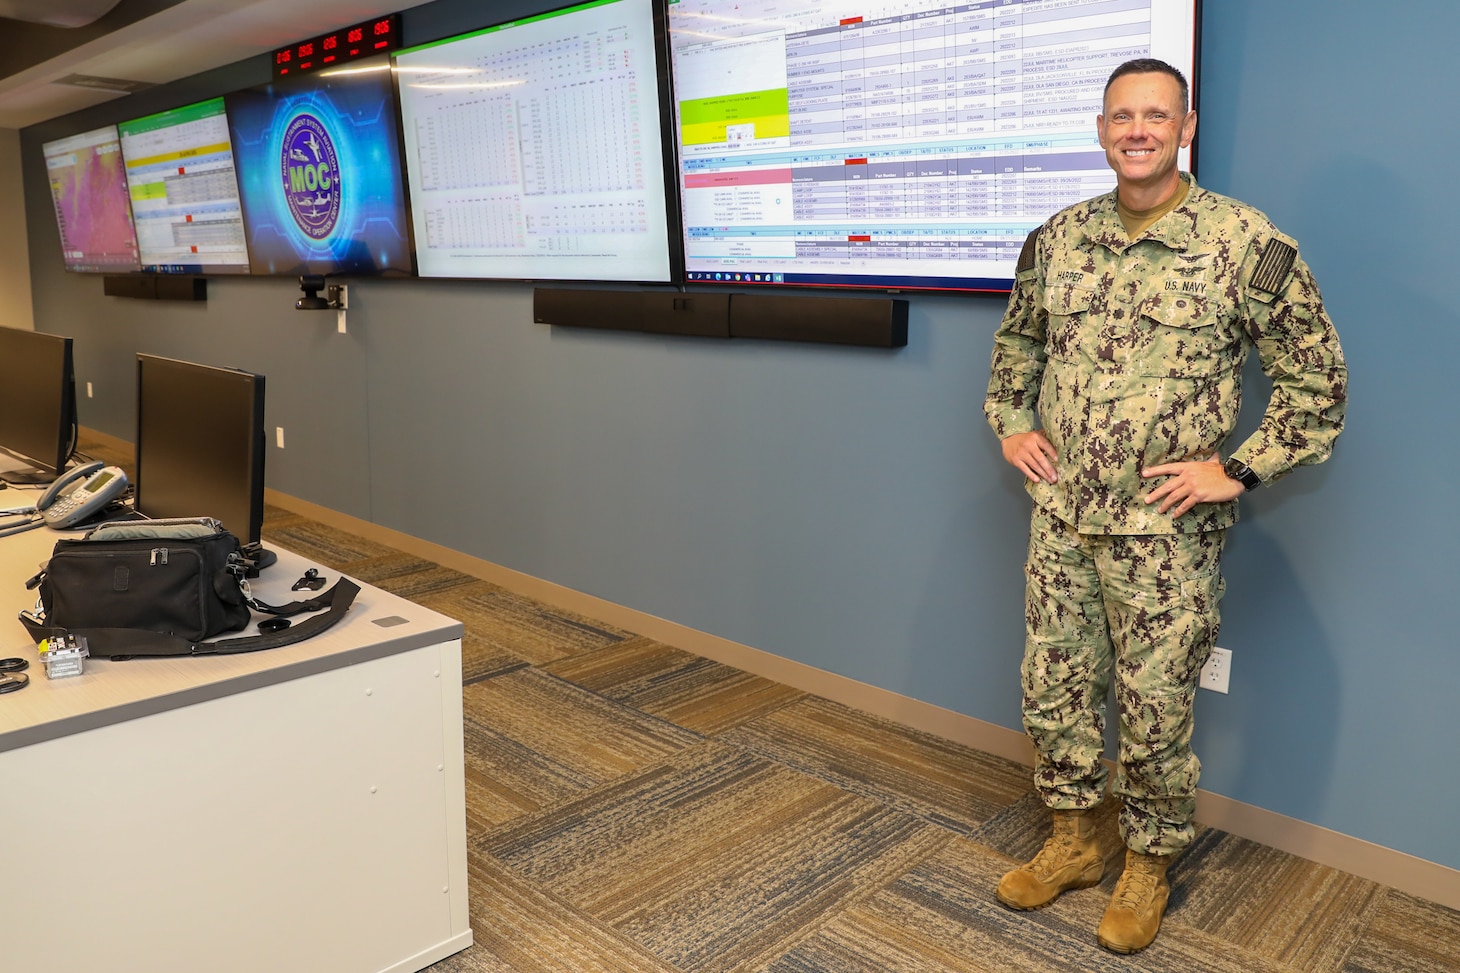 Cmdr. Ronnie Harper, Maintenance Operation Center (MOC) Aircraft on Ground (AOG) director, poses for a photo in the MOC control room, July 26.